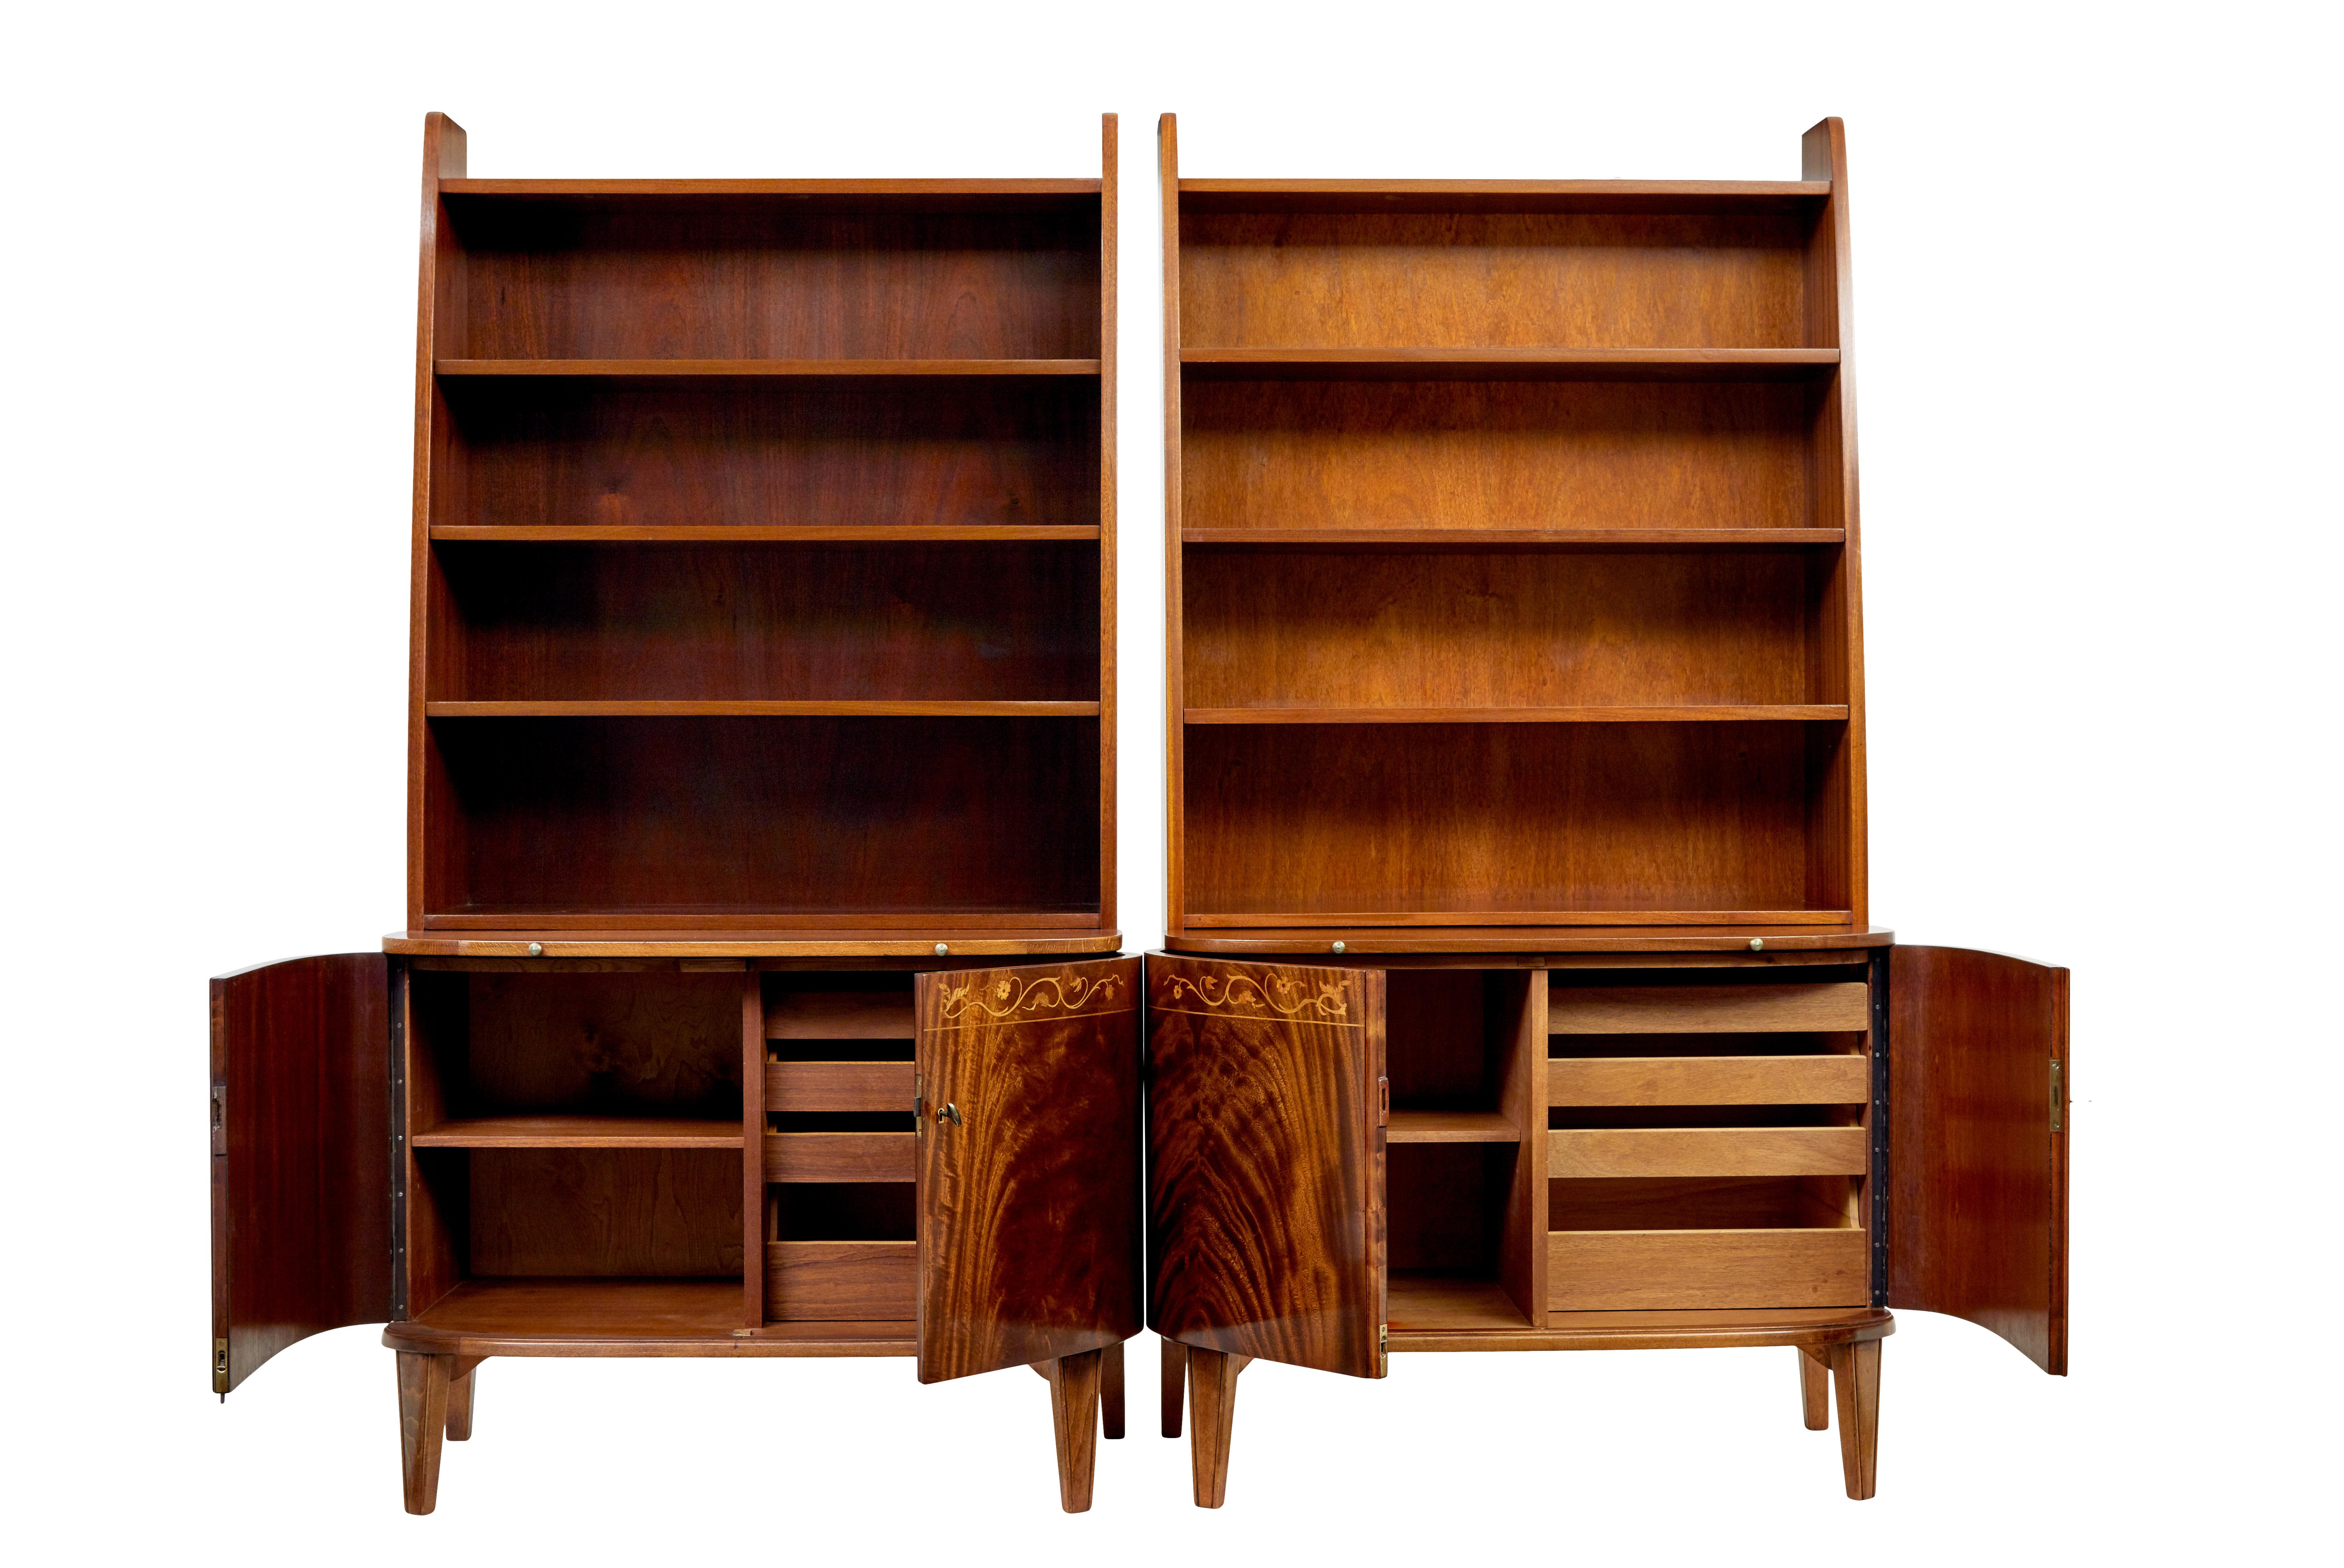 Near pair of flame mahogany bookcase units circa 1950.

Near pair because they are the same model and design, but slightly different colours and veneers used.

1 piece units, top section with 3 fixed shelves allowing 5 apertures for storage.  Each